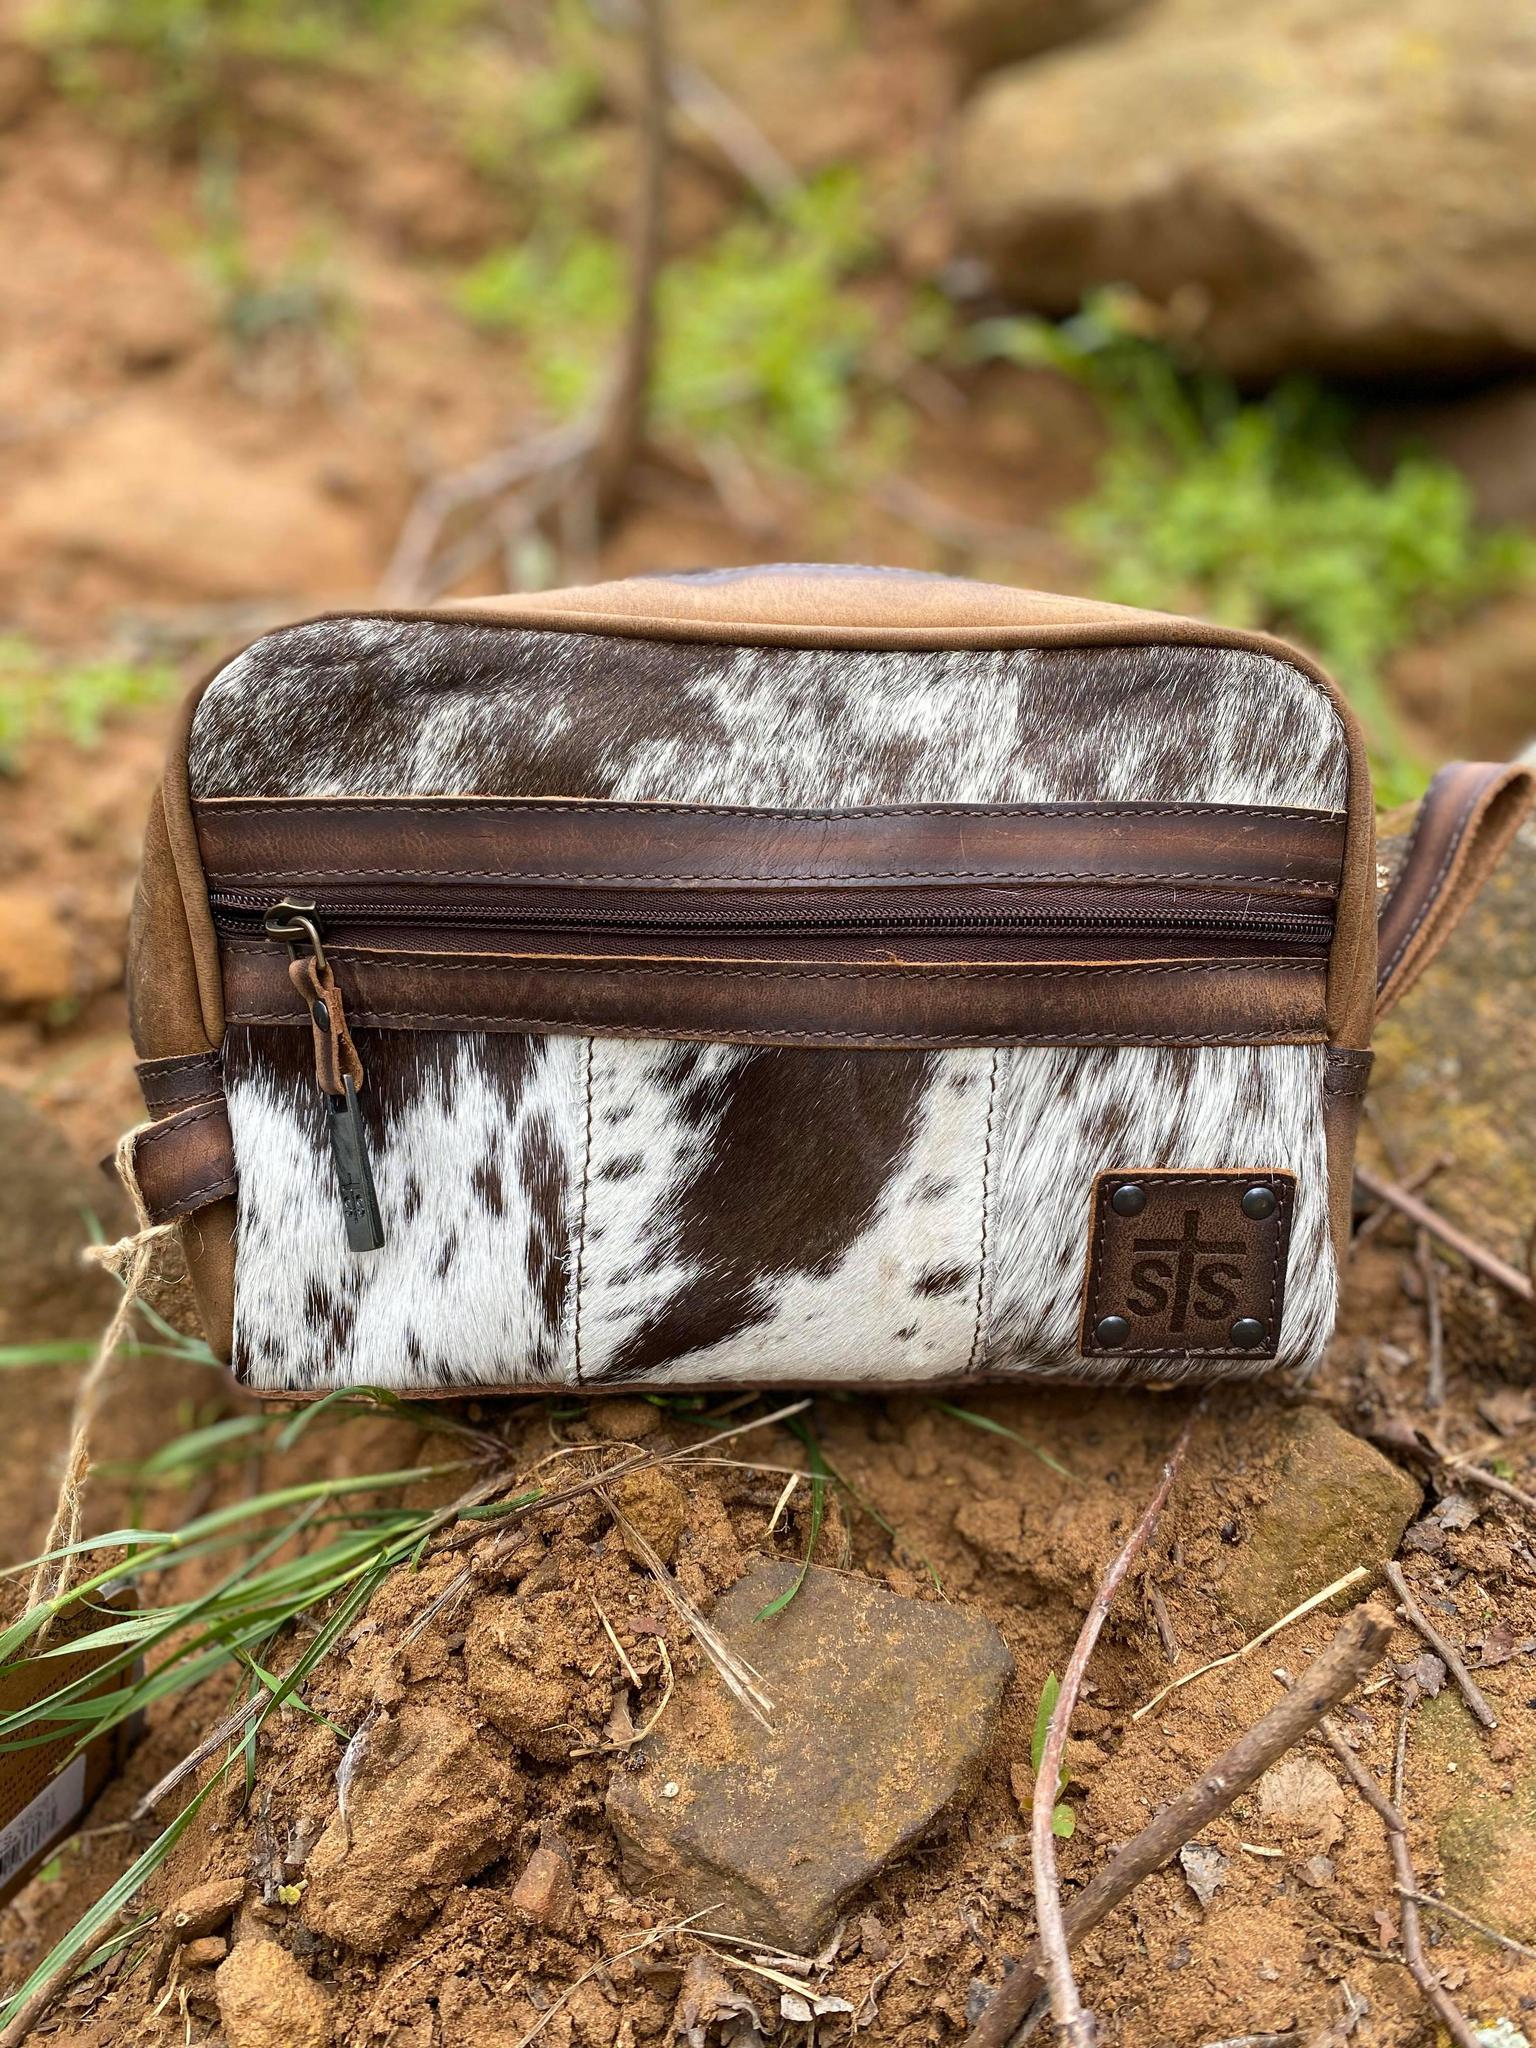 Sts Ranchwear Concealed Carry Purse 2024 | favors.com